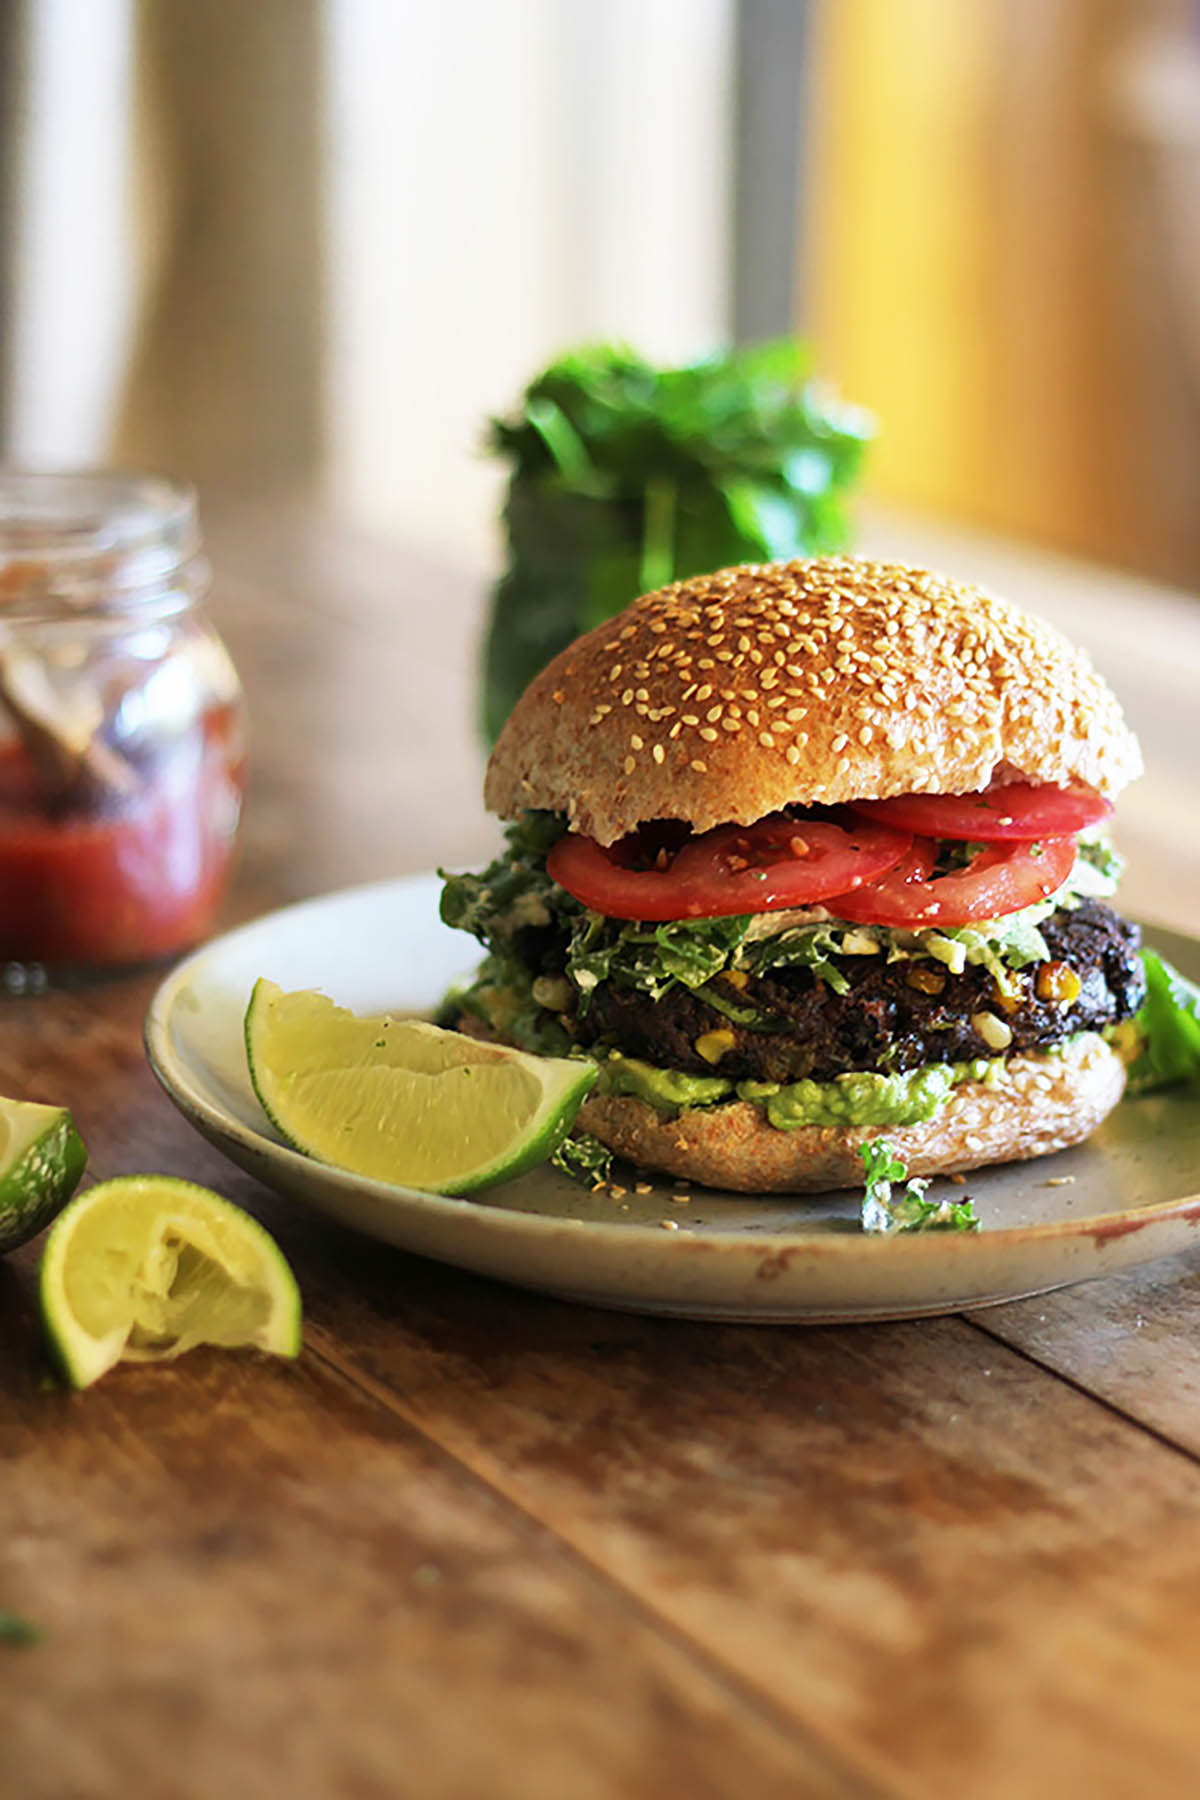 A black bean burger topped with cabbage, avocado, and tomato on a plate.